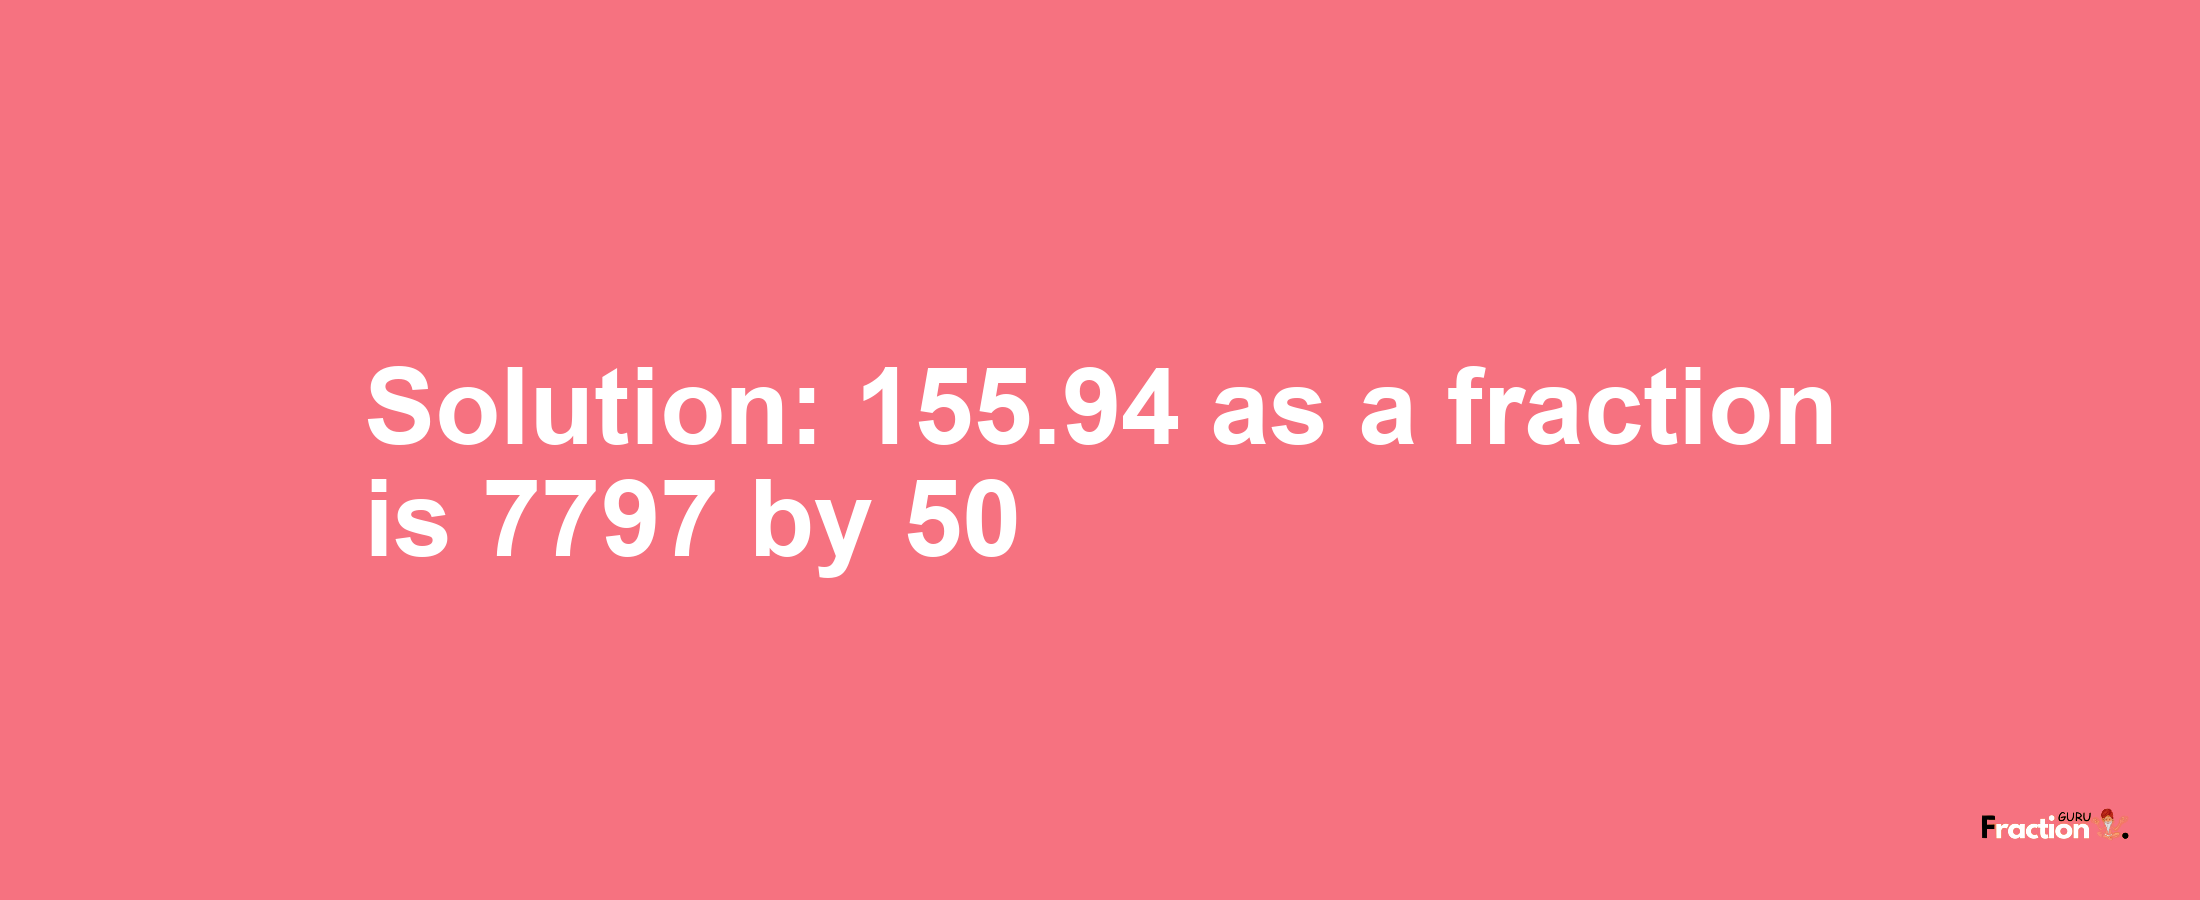 Solution:155.94 as a fraction is 7797/50